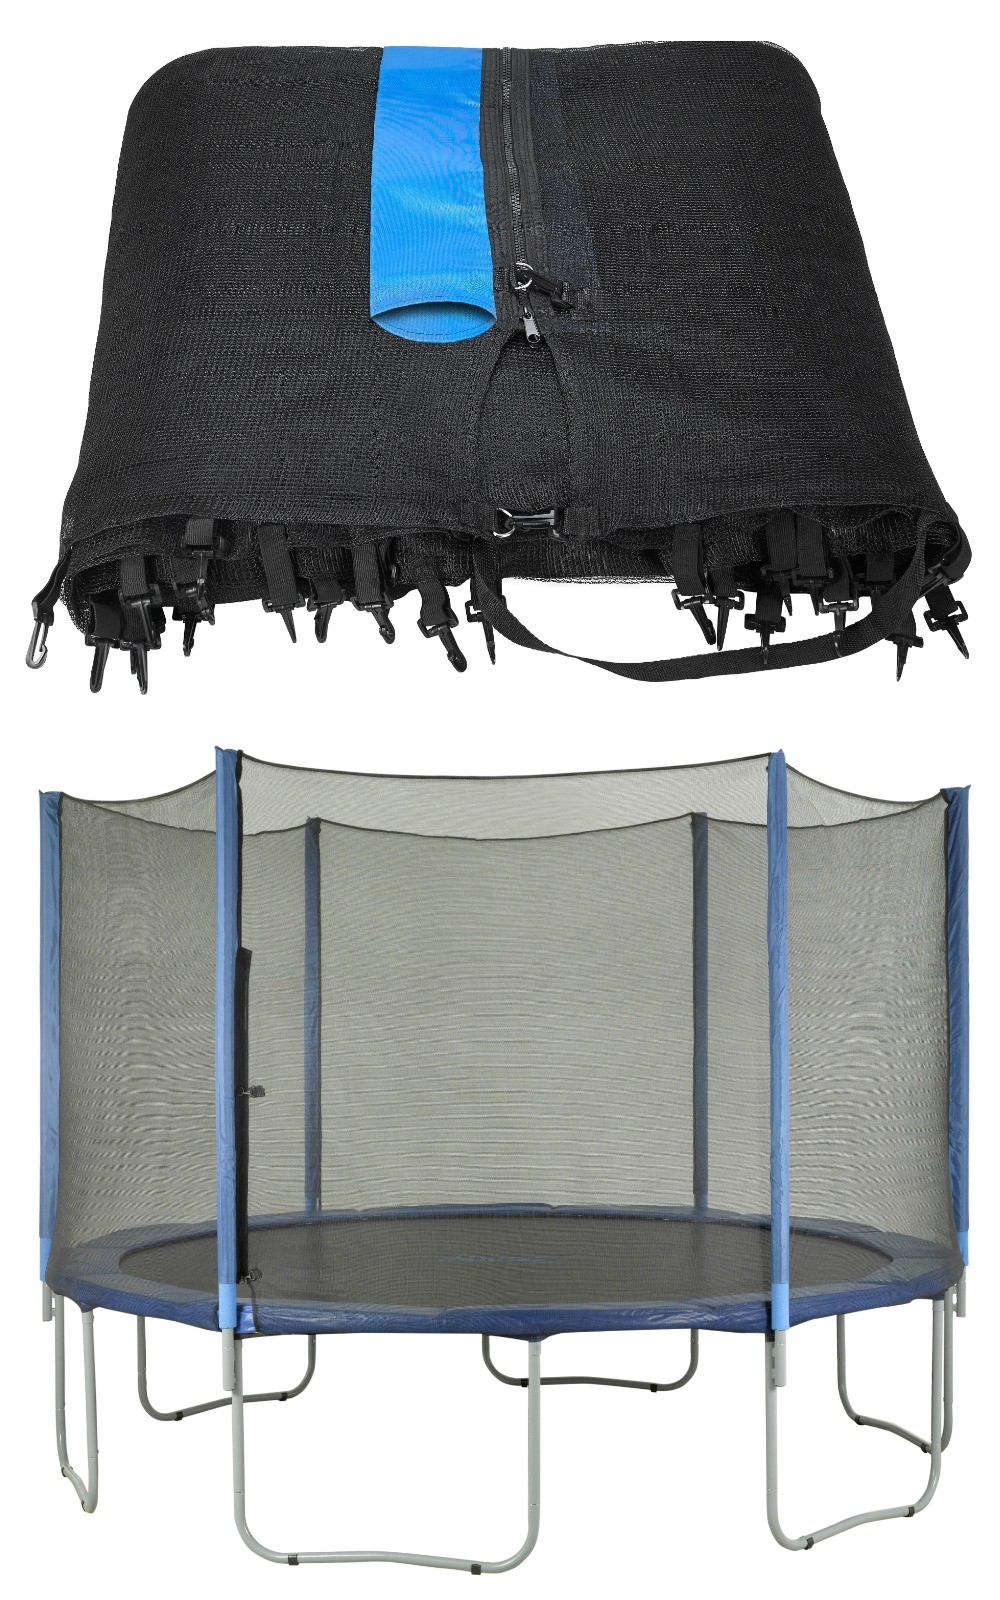 Trampoline Replacement Enclosure Safety Net, fits for 12 FT. Round Frames using 6 Straight Poles - Net Only